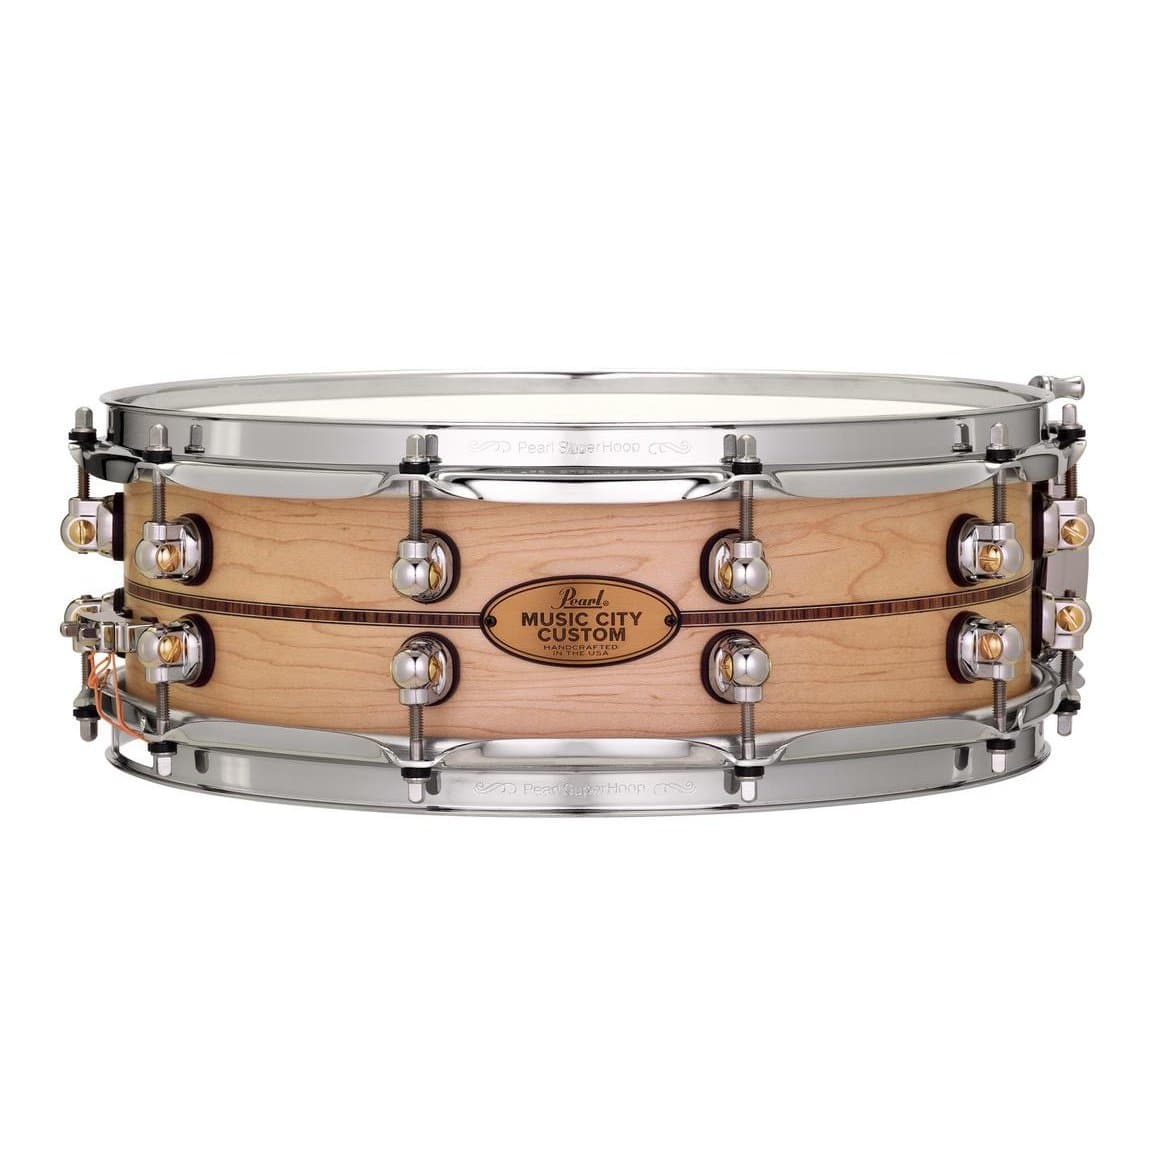 Pearl Music City Custom Solid Maple 14x5 Snare Drum - Natural With Kingwood Inlay